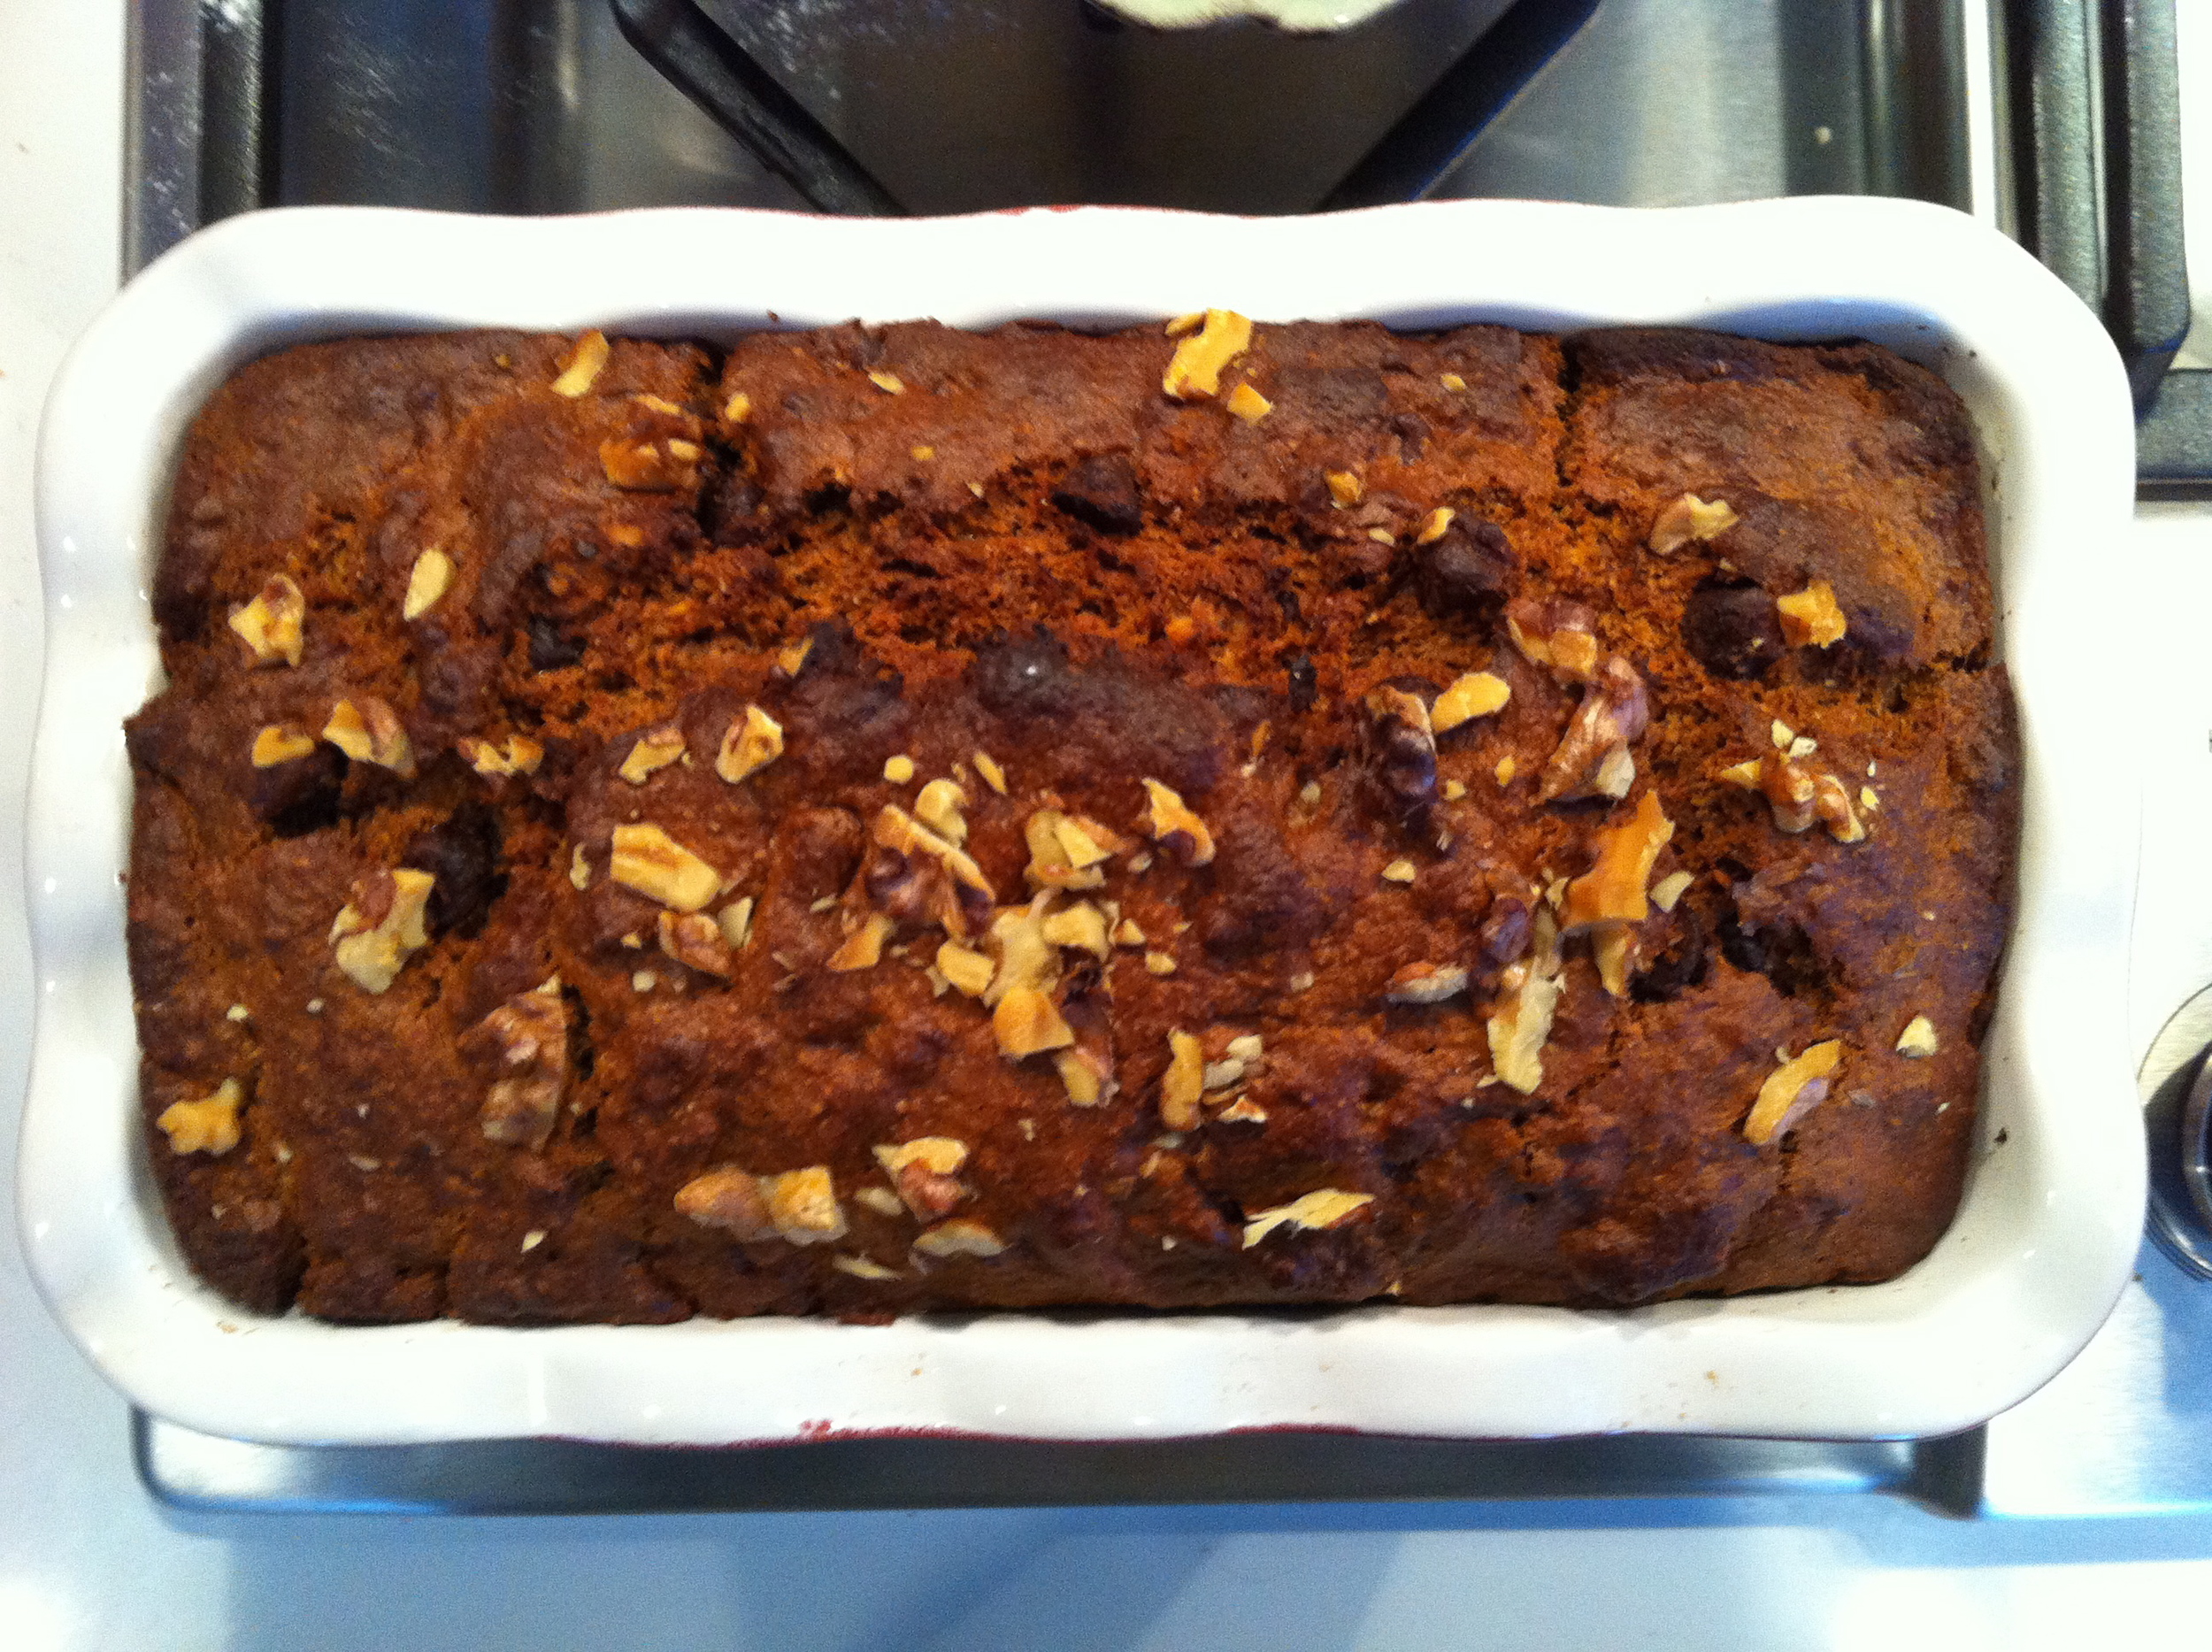 This banana bread is healthy and delicious!